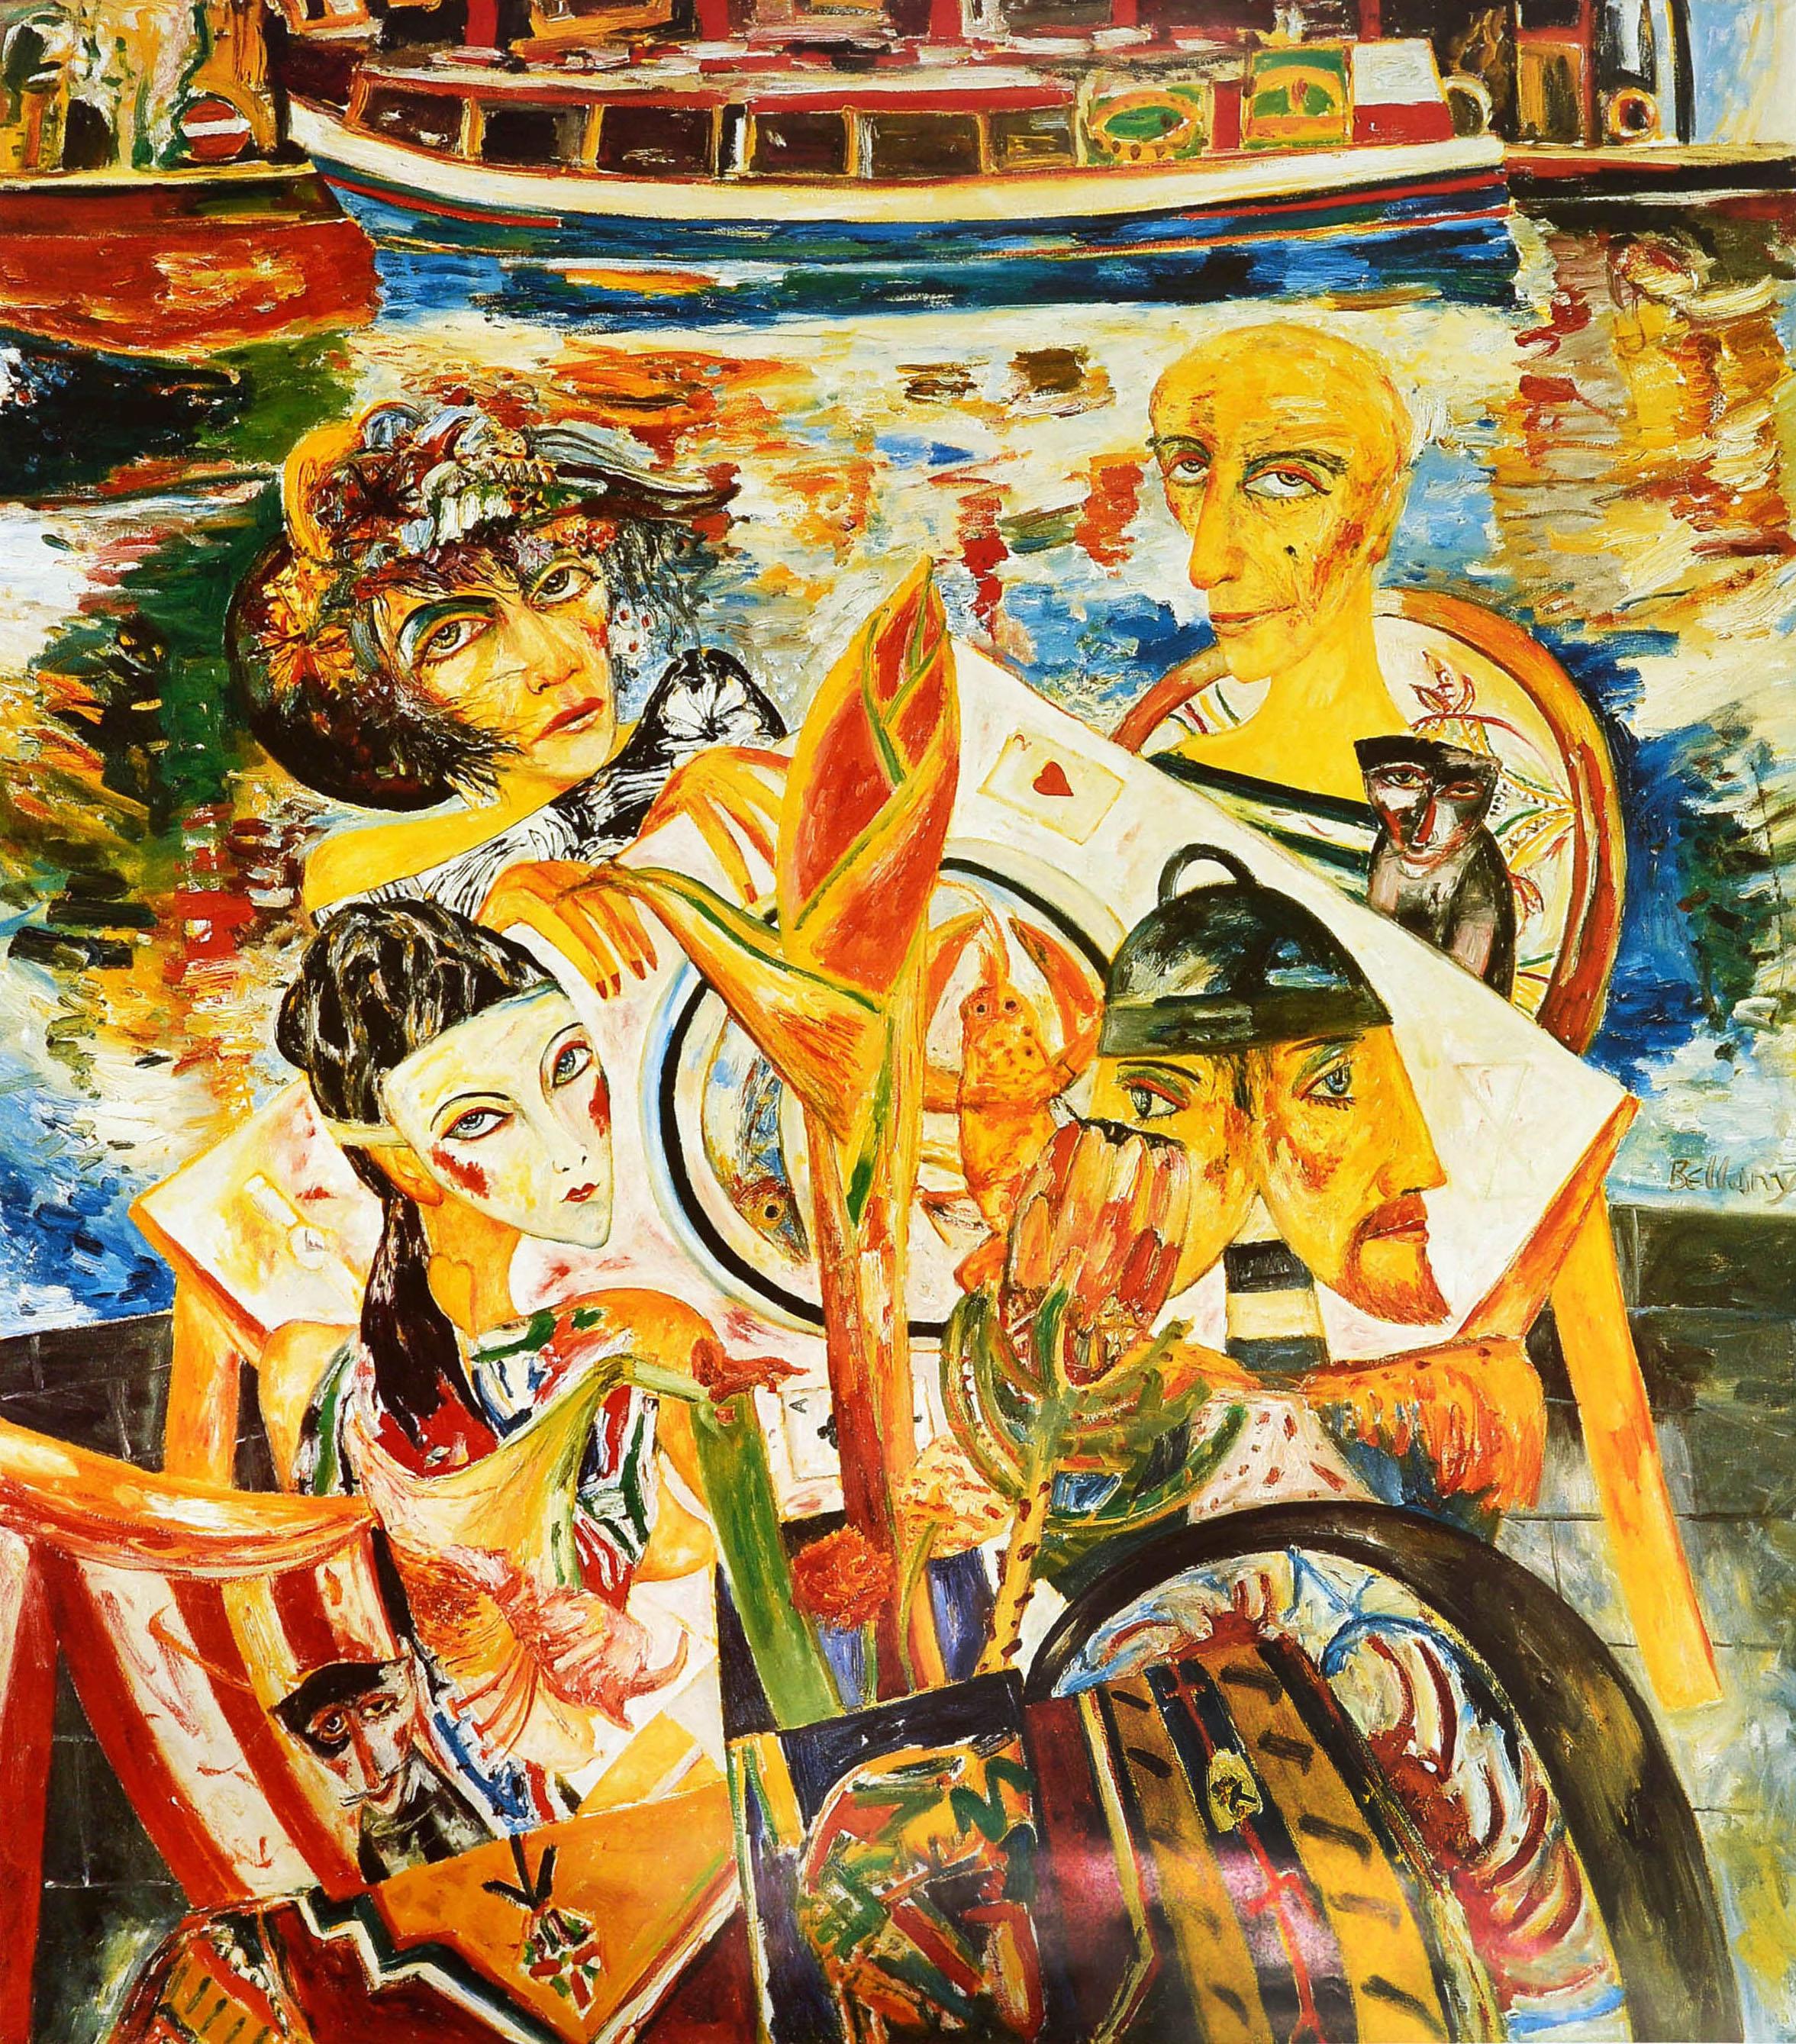 Original vintage London Underground poster for Camden Lock nearest station Camden town. Colourful illustration depicting people enjoying a lobster meal at a table with canal boats on the water. Art on the Underground - Camden Lock by John Bellany a